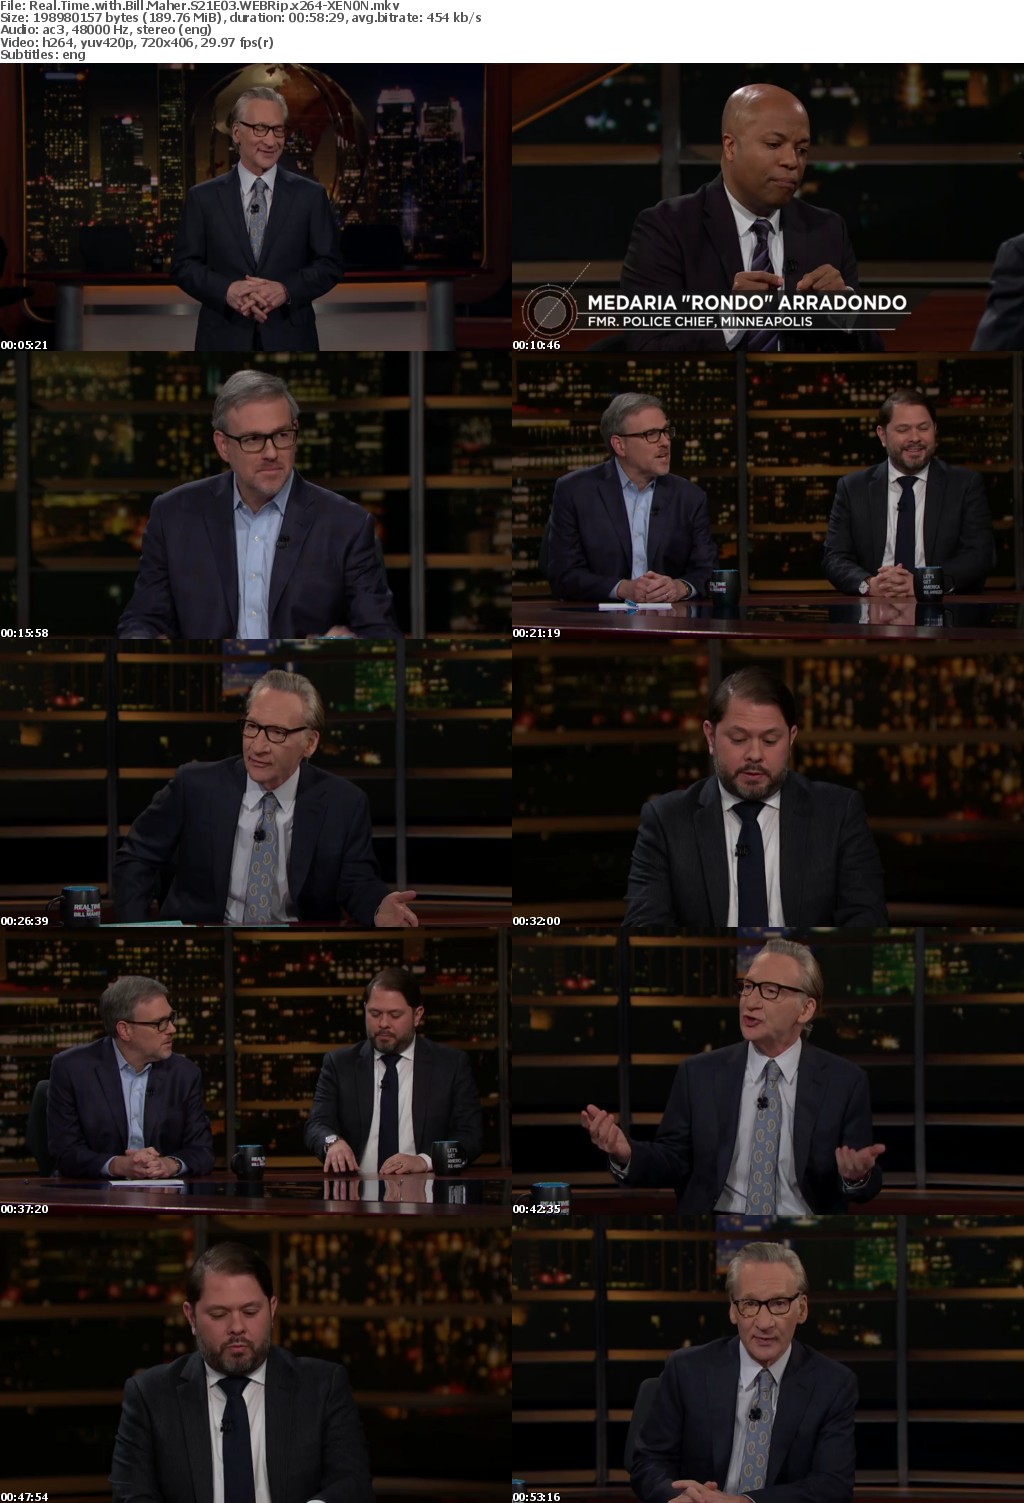 Real Time with Bill Maher S21E03 WEBRip x264-XEN0N